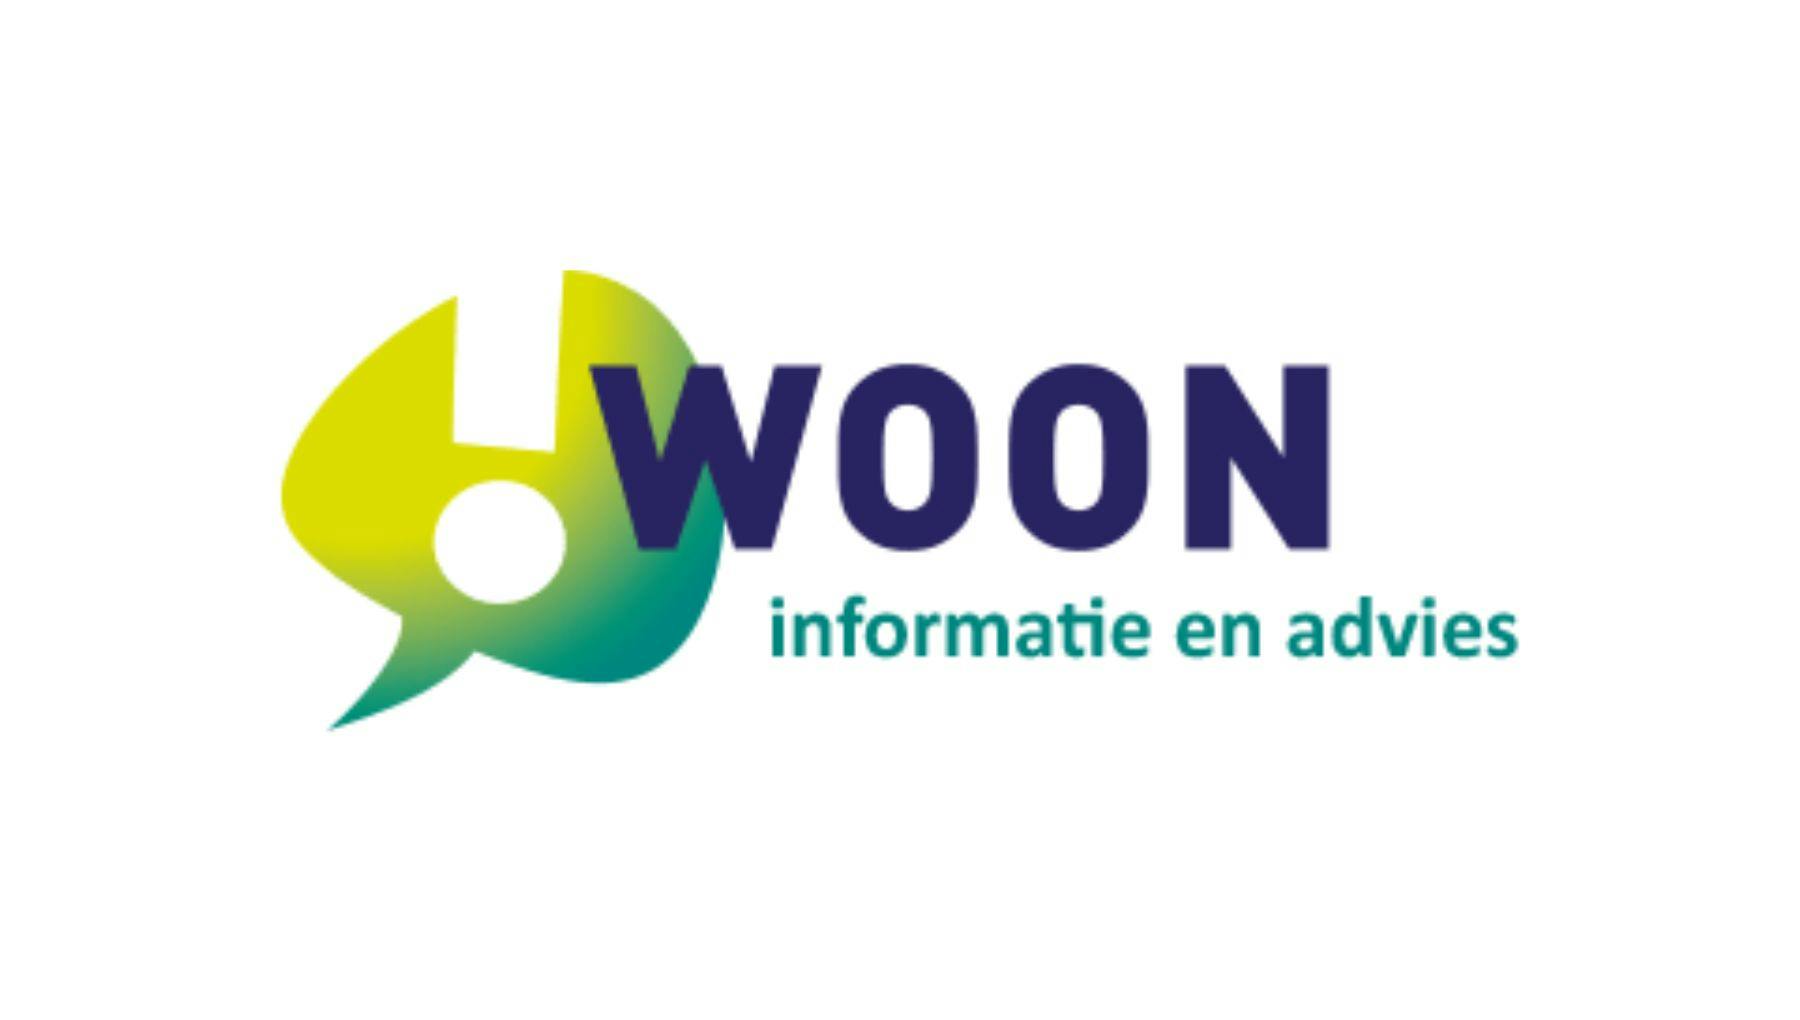 !WOON